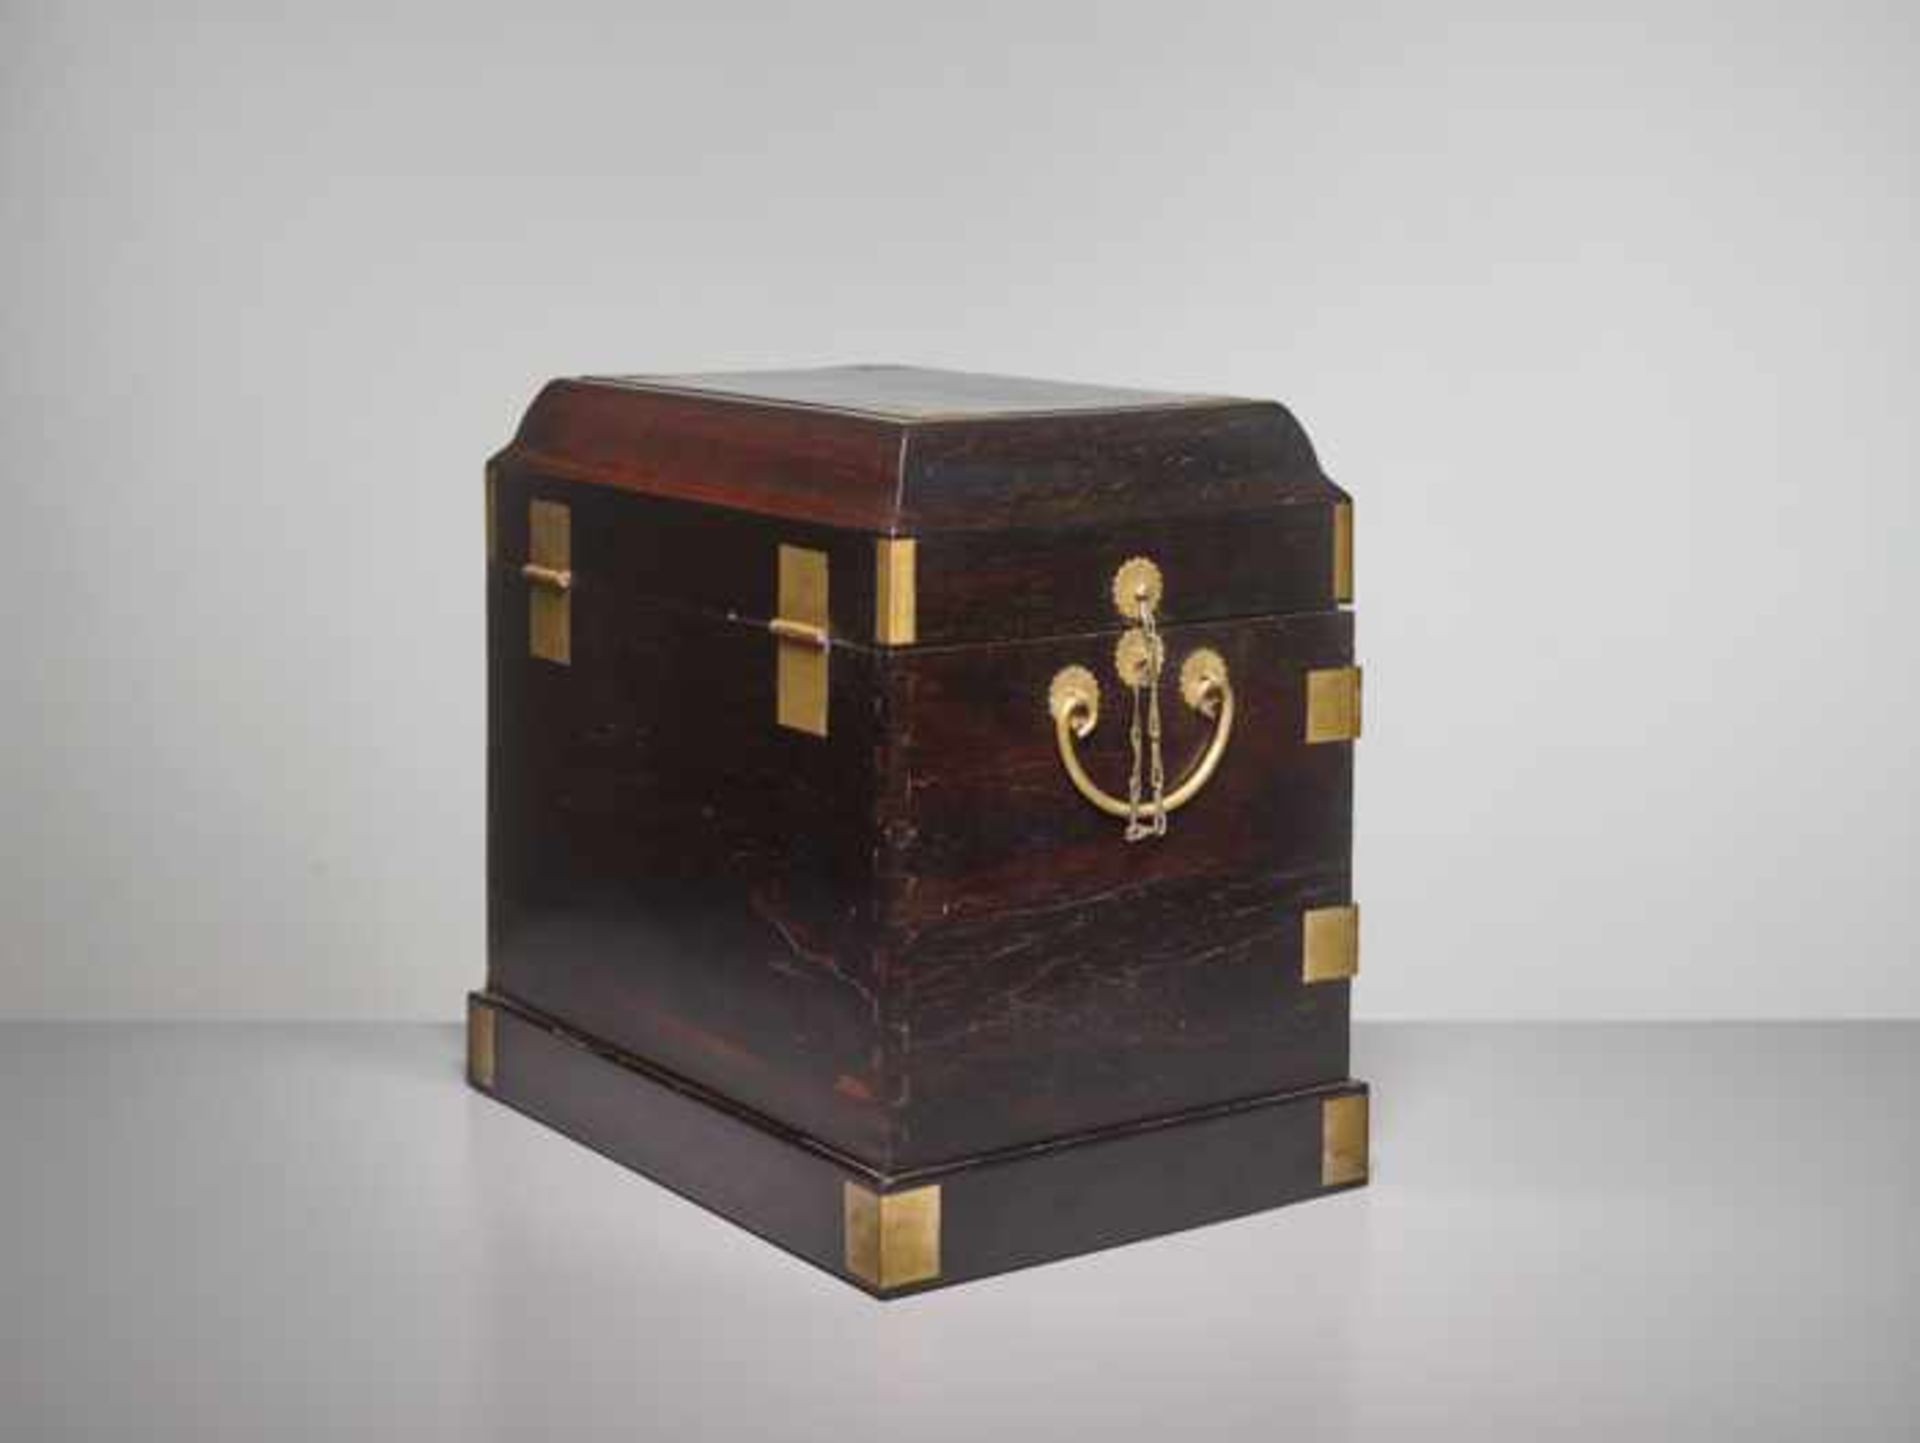 A LARGE ZITAN PORTABLE CHEST, GUANPIXIANG Dark brown ‘Zitan’ wood, brass fittings. China, 18th - Image 5 of 7